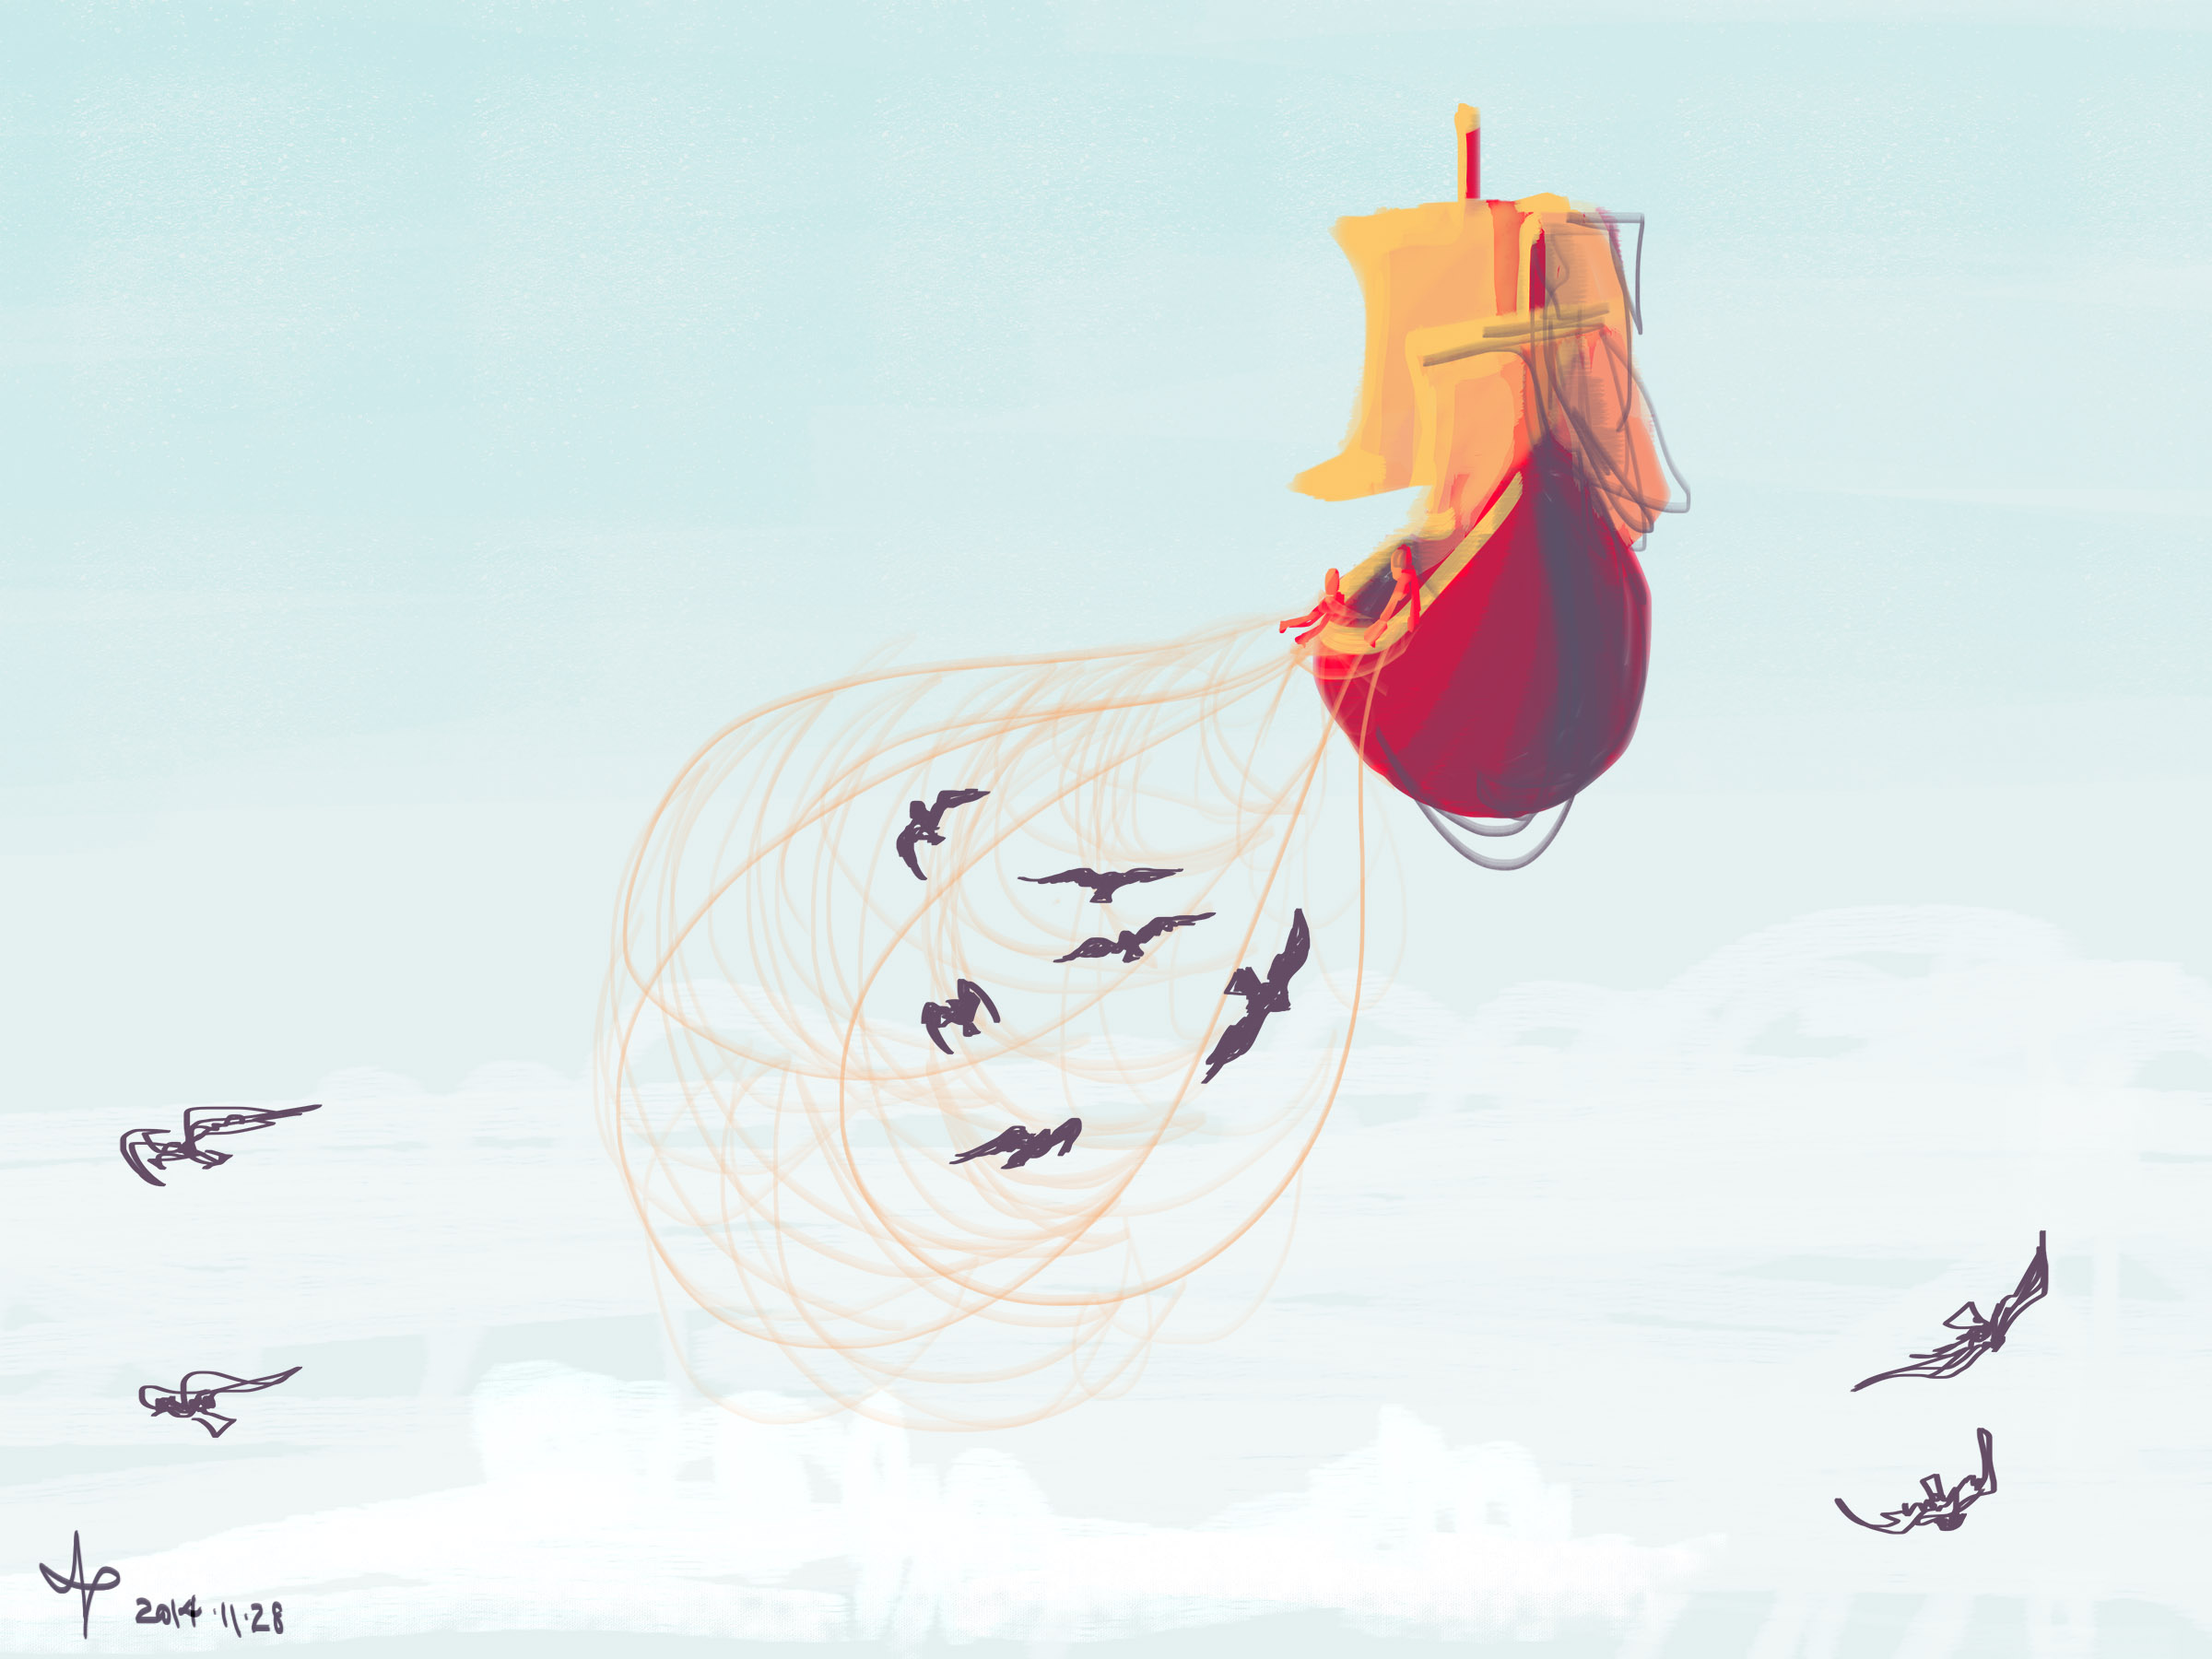 A digital painting of a flying pirate ship throwing a net out to catch crows.